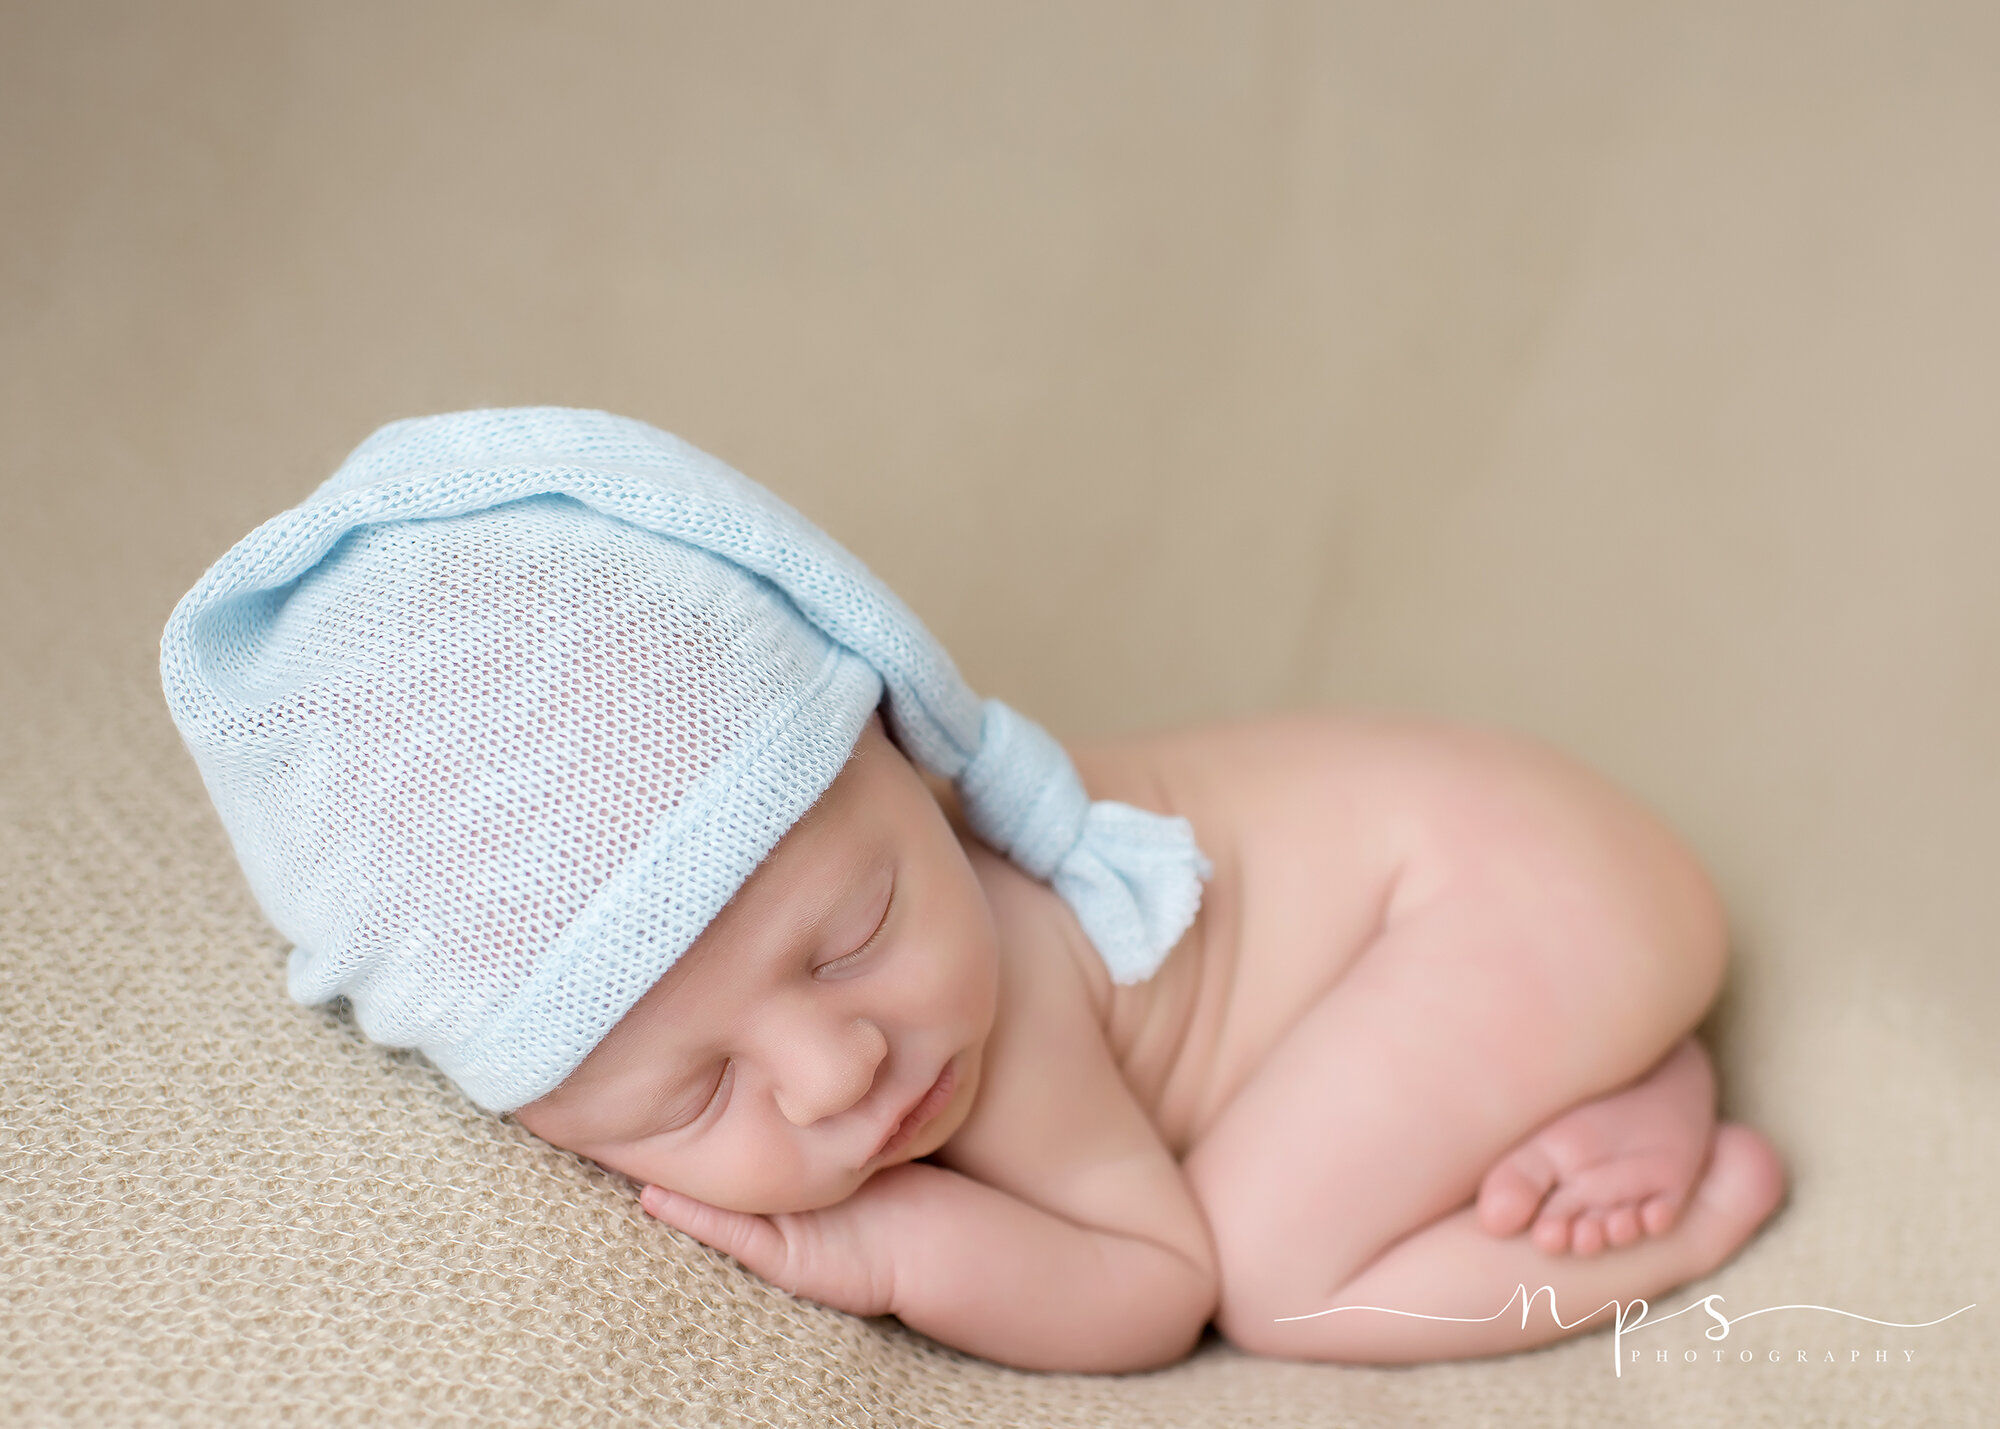 Baby Photographer Southern Pines 1 - NPS Photography